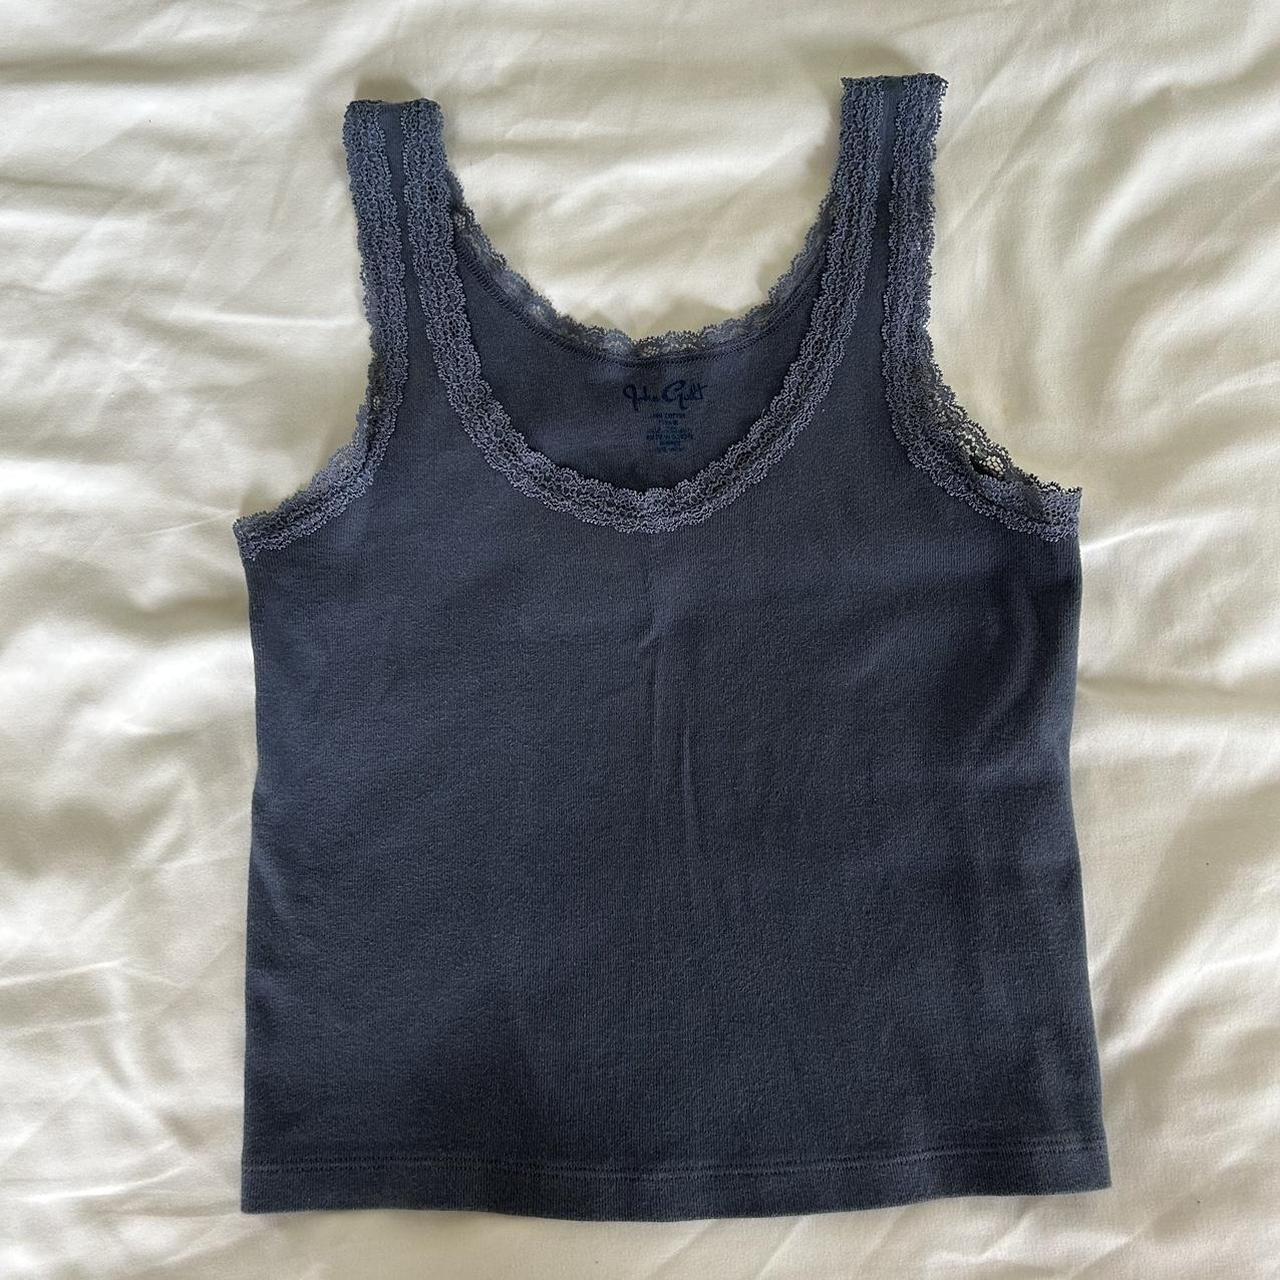 SOLD OUT Brandy melville navy tianna lace tank Perfect condition 400K